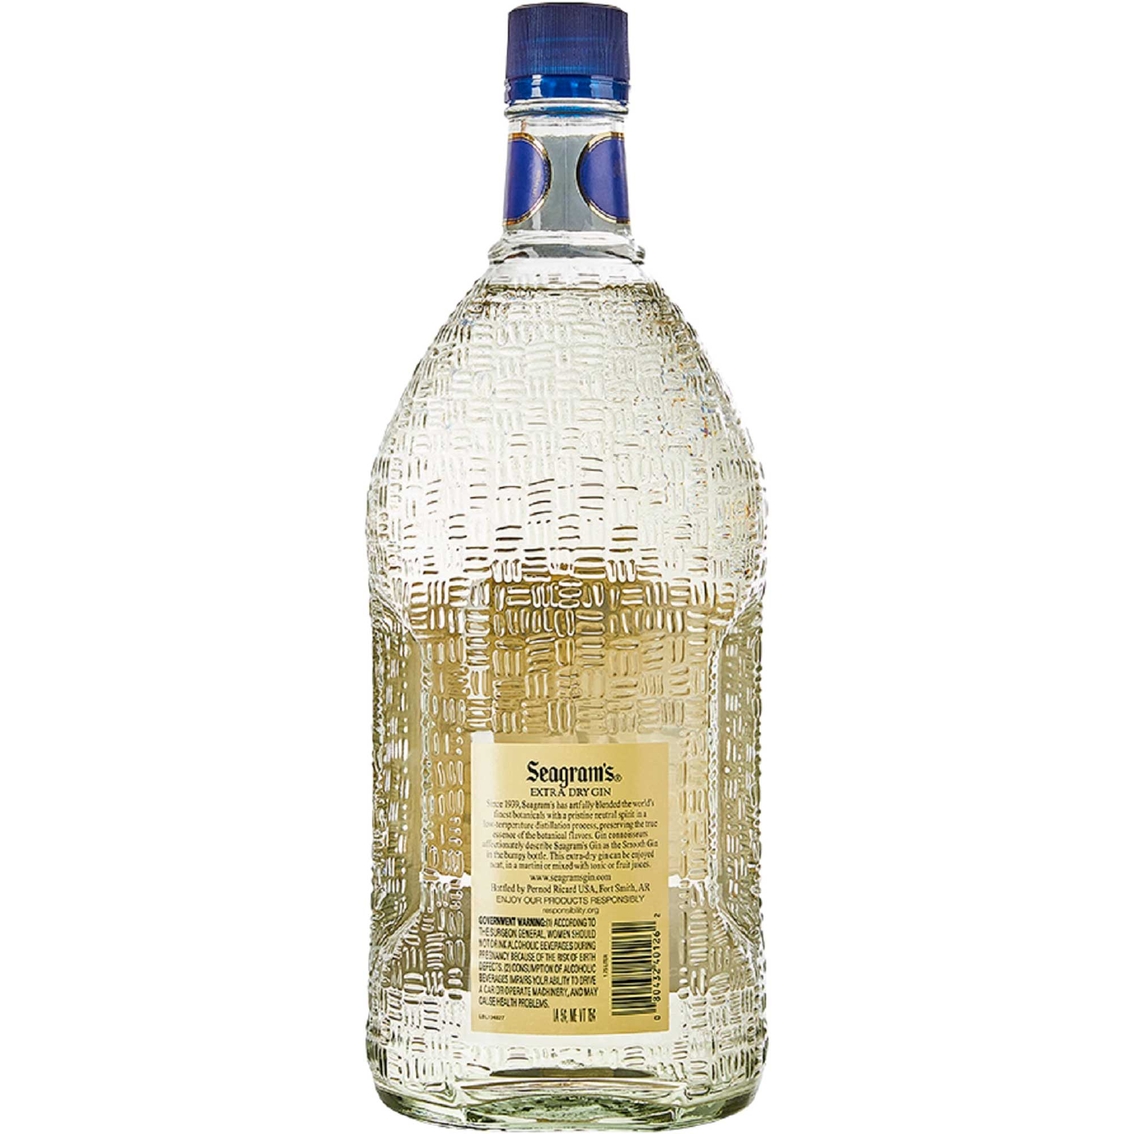 Seagrams Extra Dry Gin 1.75L - Image 2 of 2